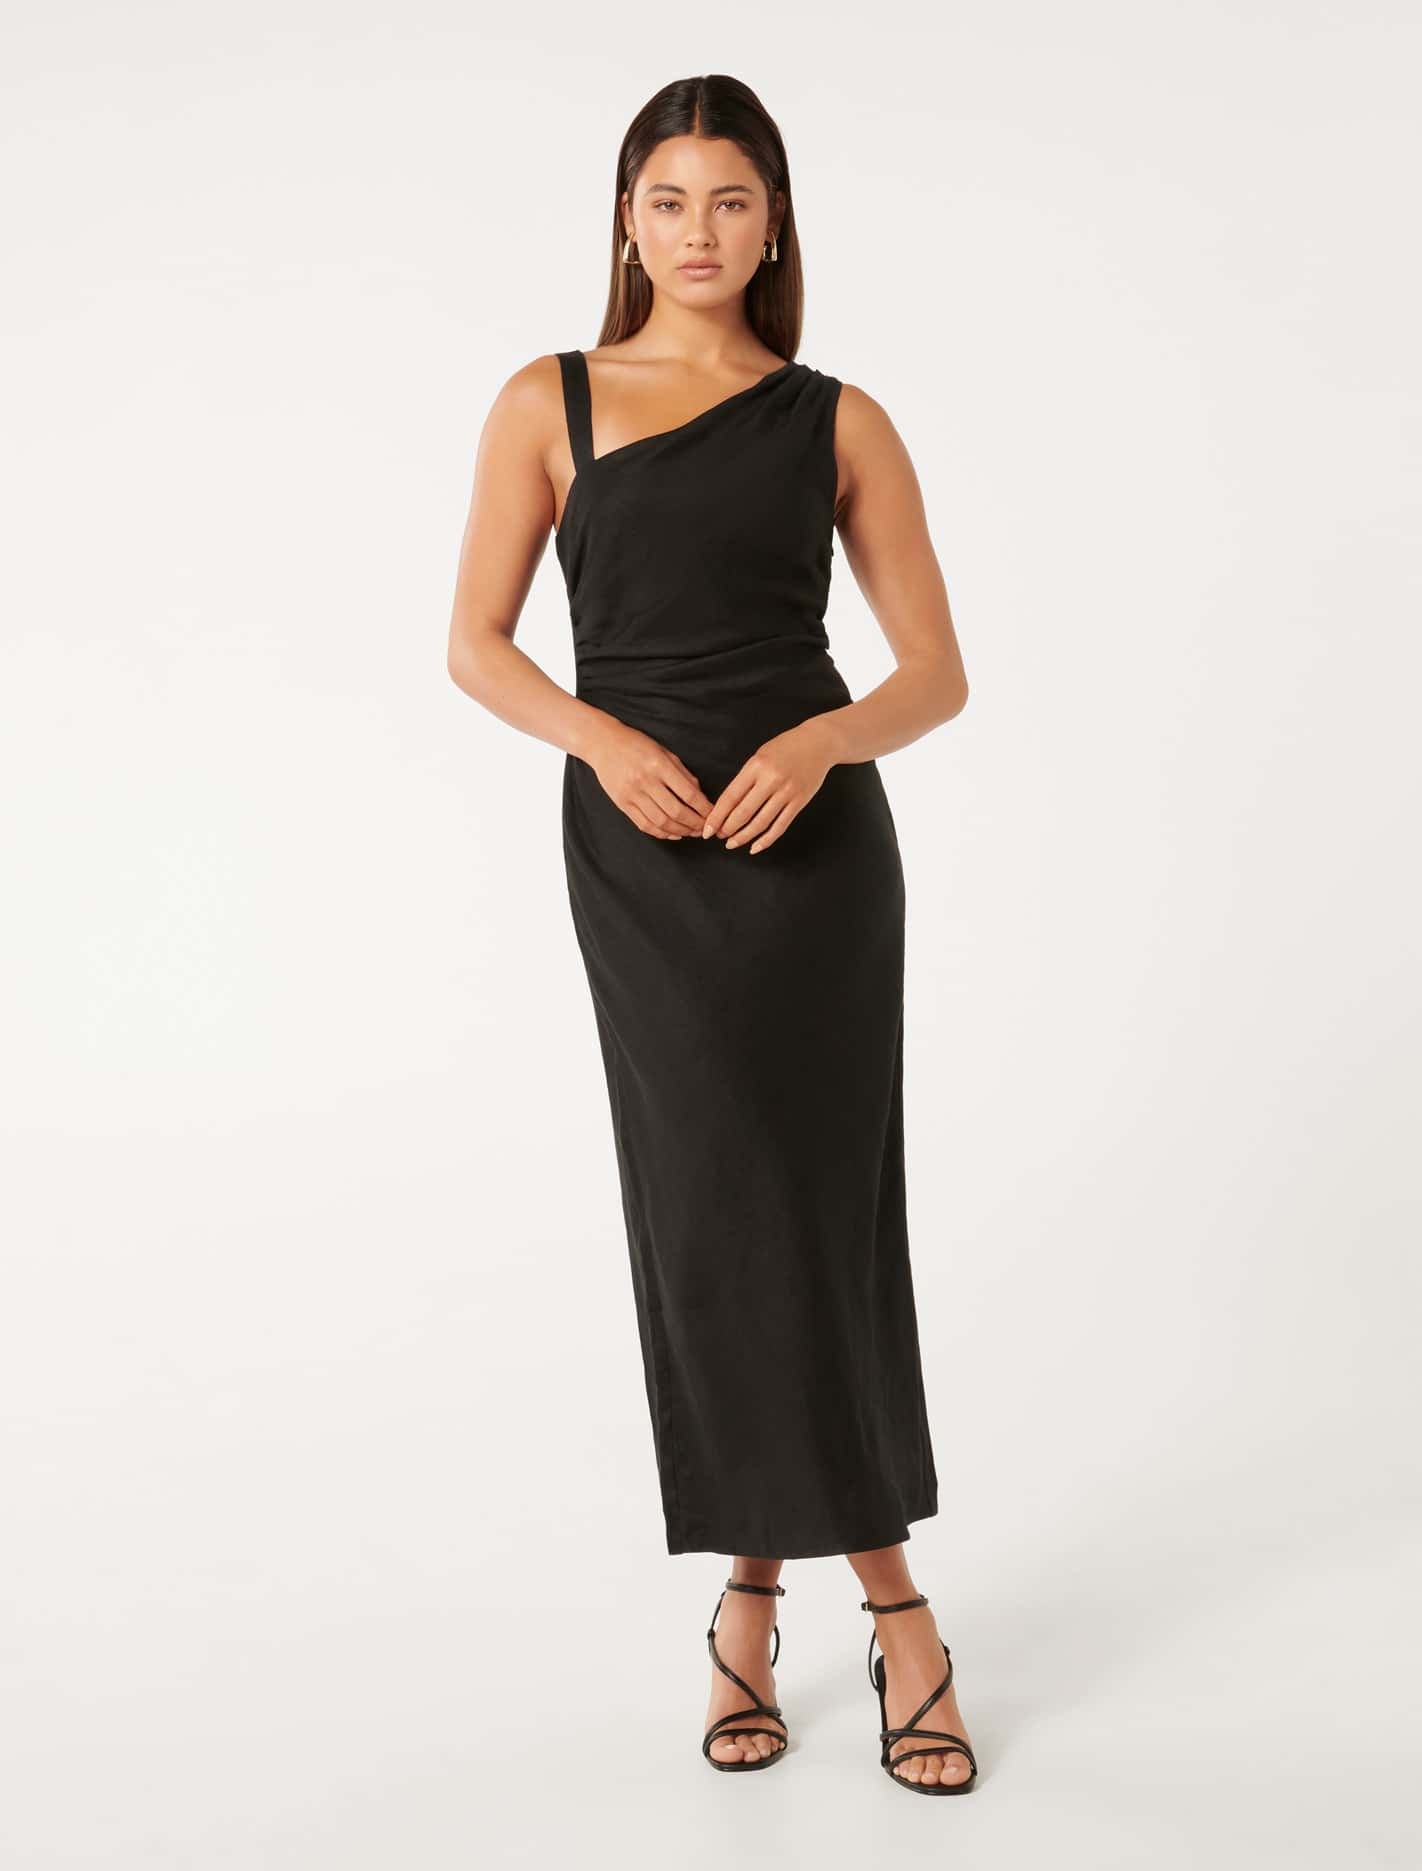 Forever New Dresses | Shop Party Dresses For Women Online – Page 2